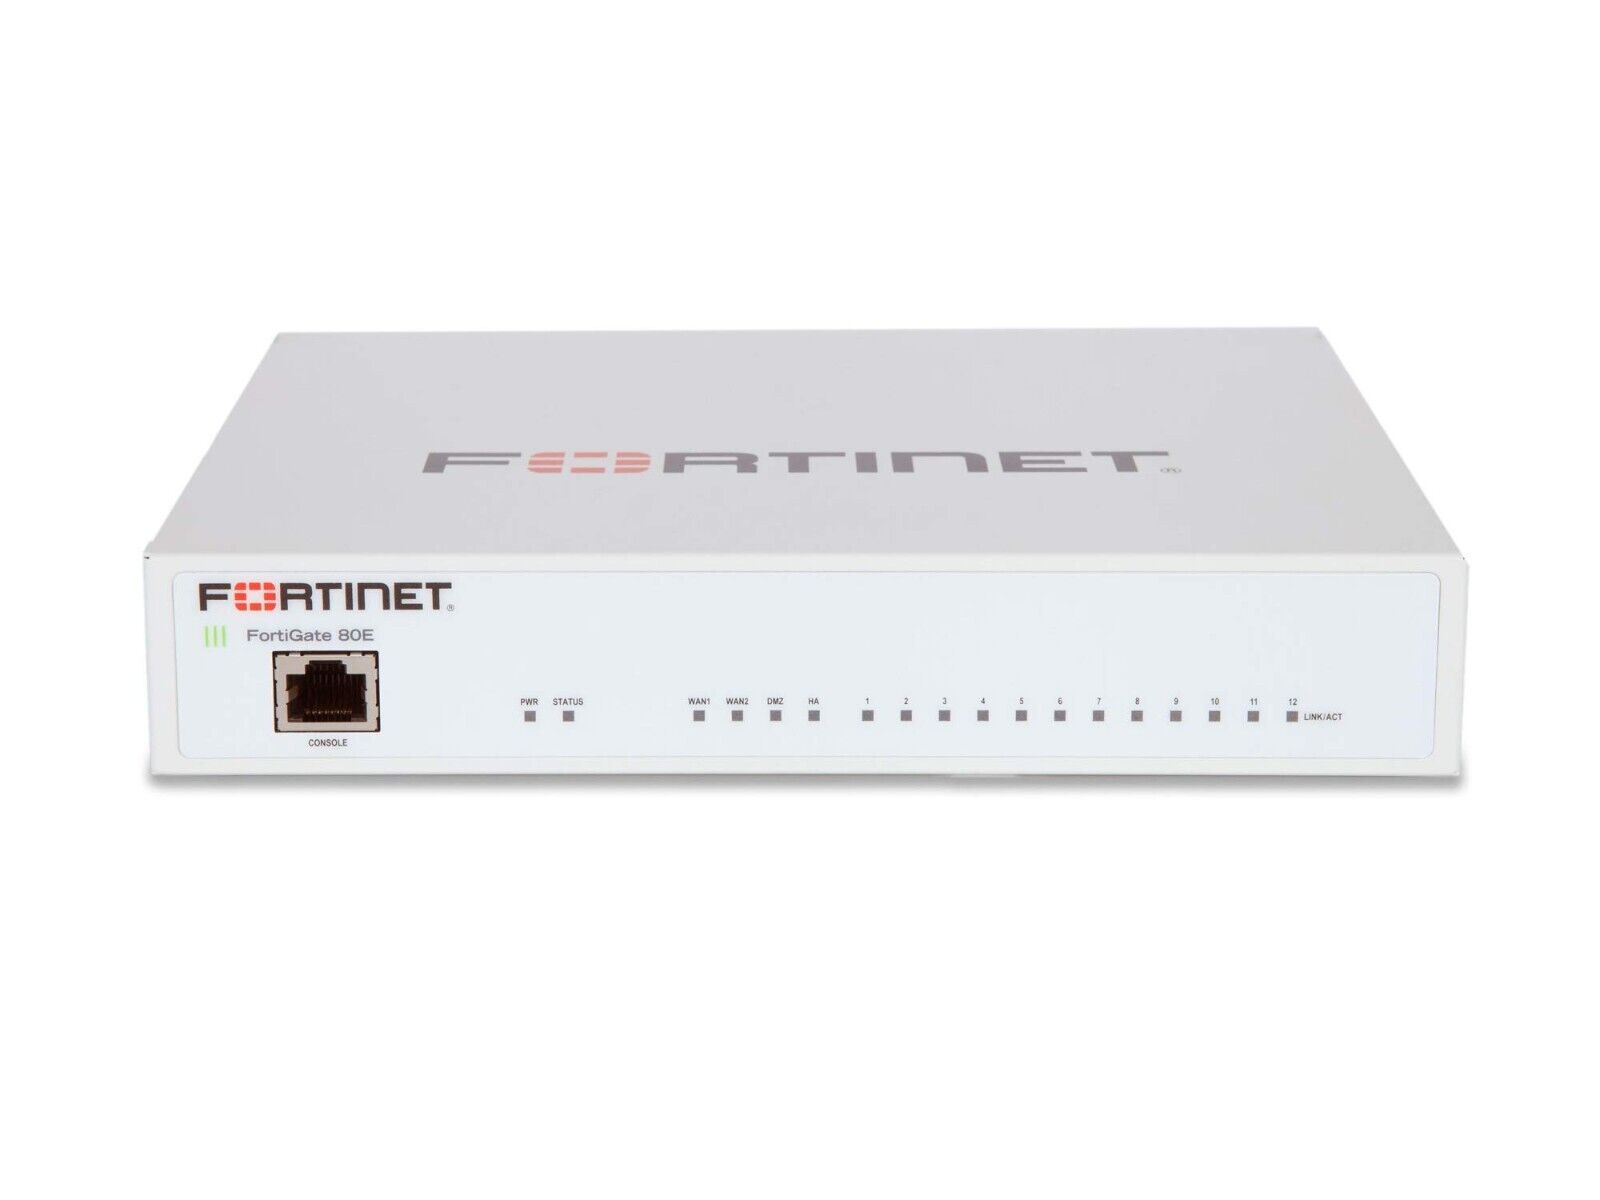 Fortinet FortiGate 80E 14 Ports Firewall Appliance with adapter / No Warranty